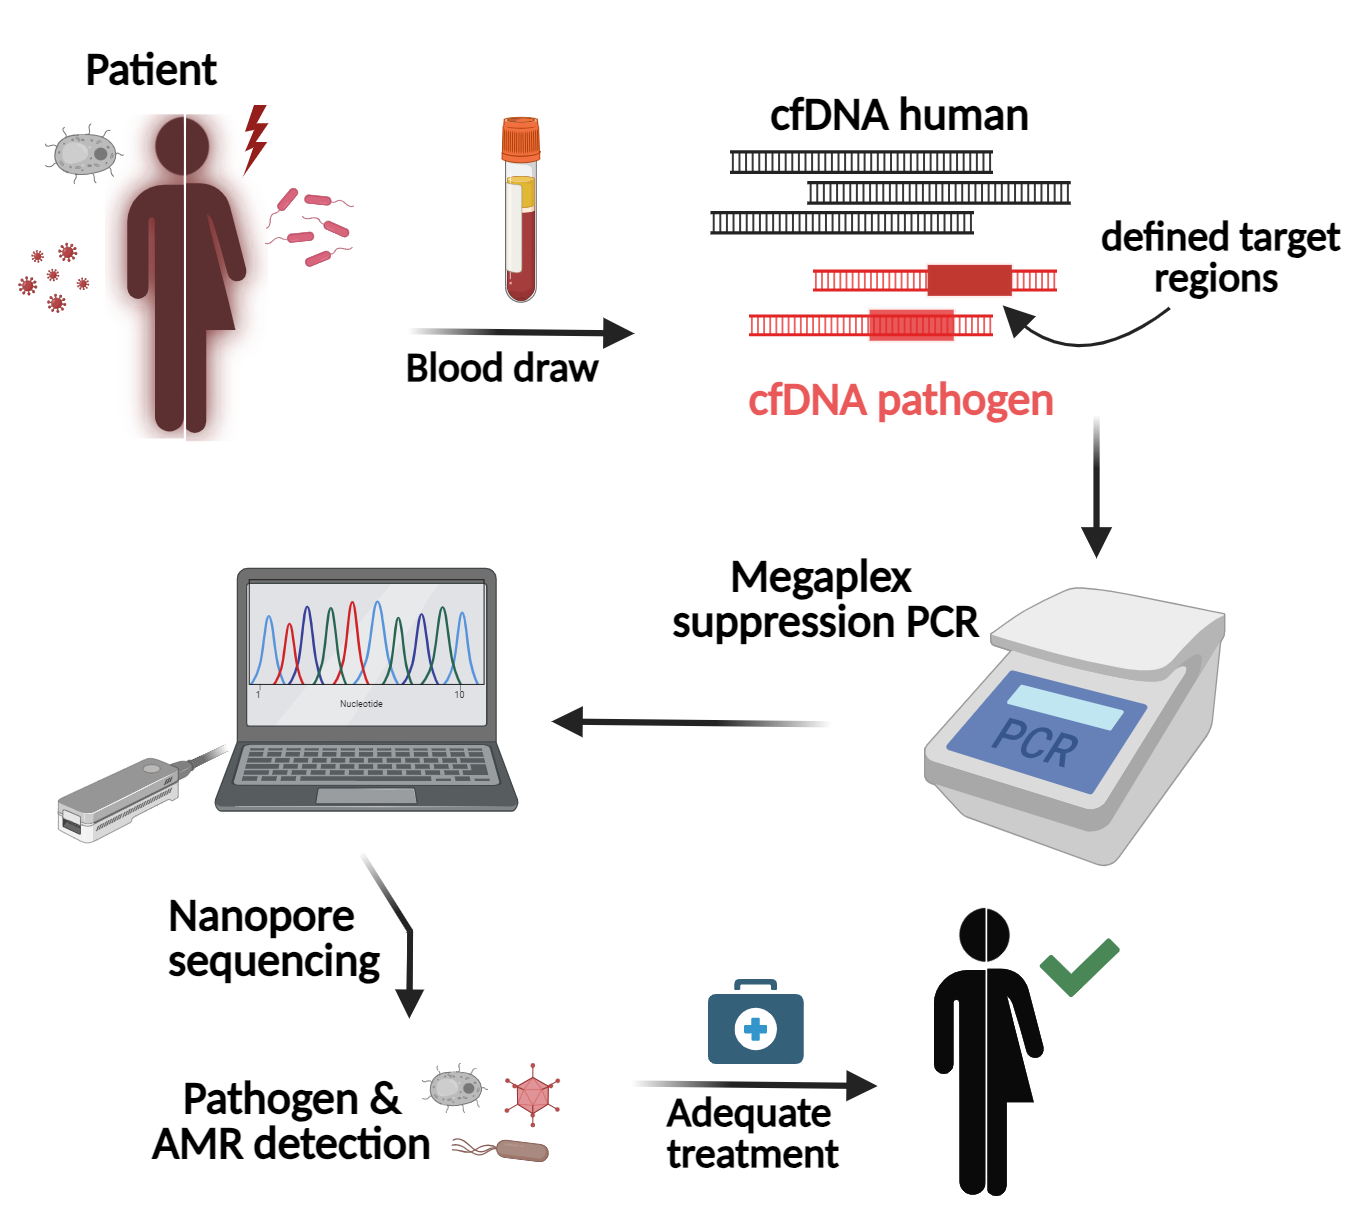 Method for the targeted detection of defined resistance markers. Suppression PCR is used to amplify a wide variety of target regions in a targeted manner and to provide real-time sequencing and bioinformatics using multiplexing methods.